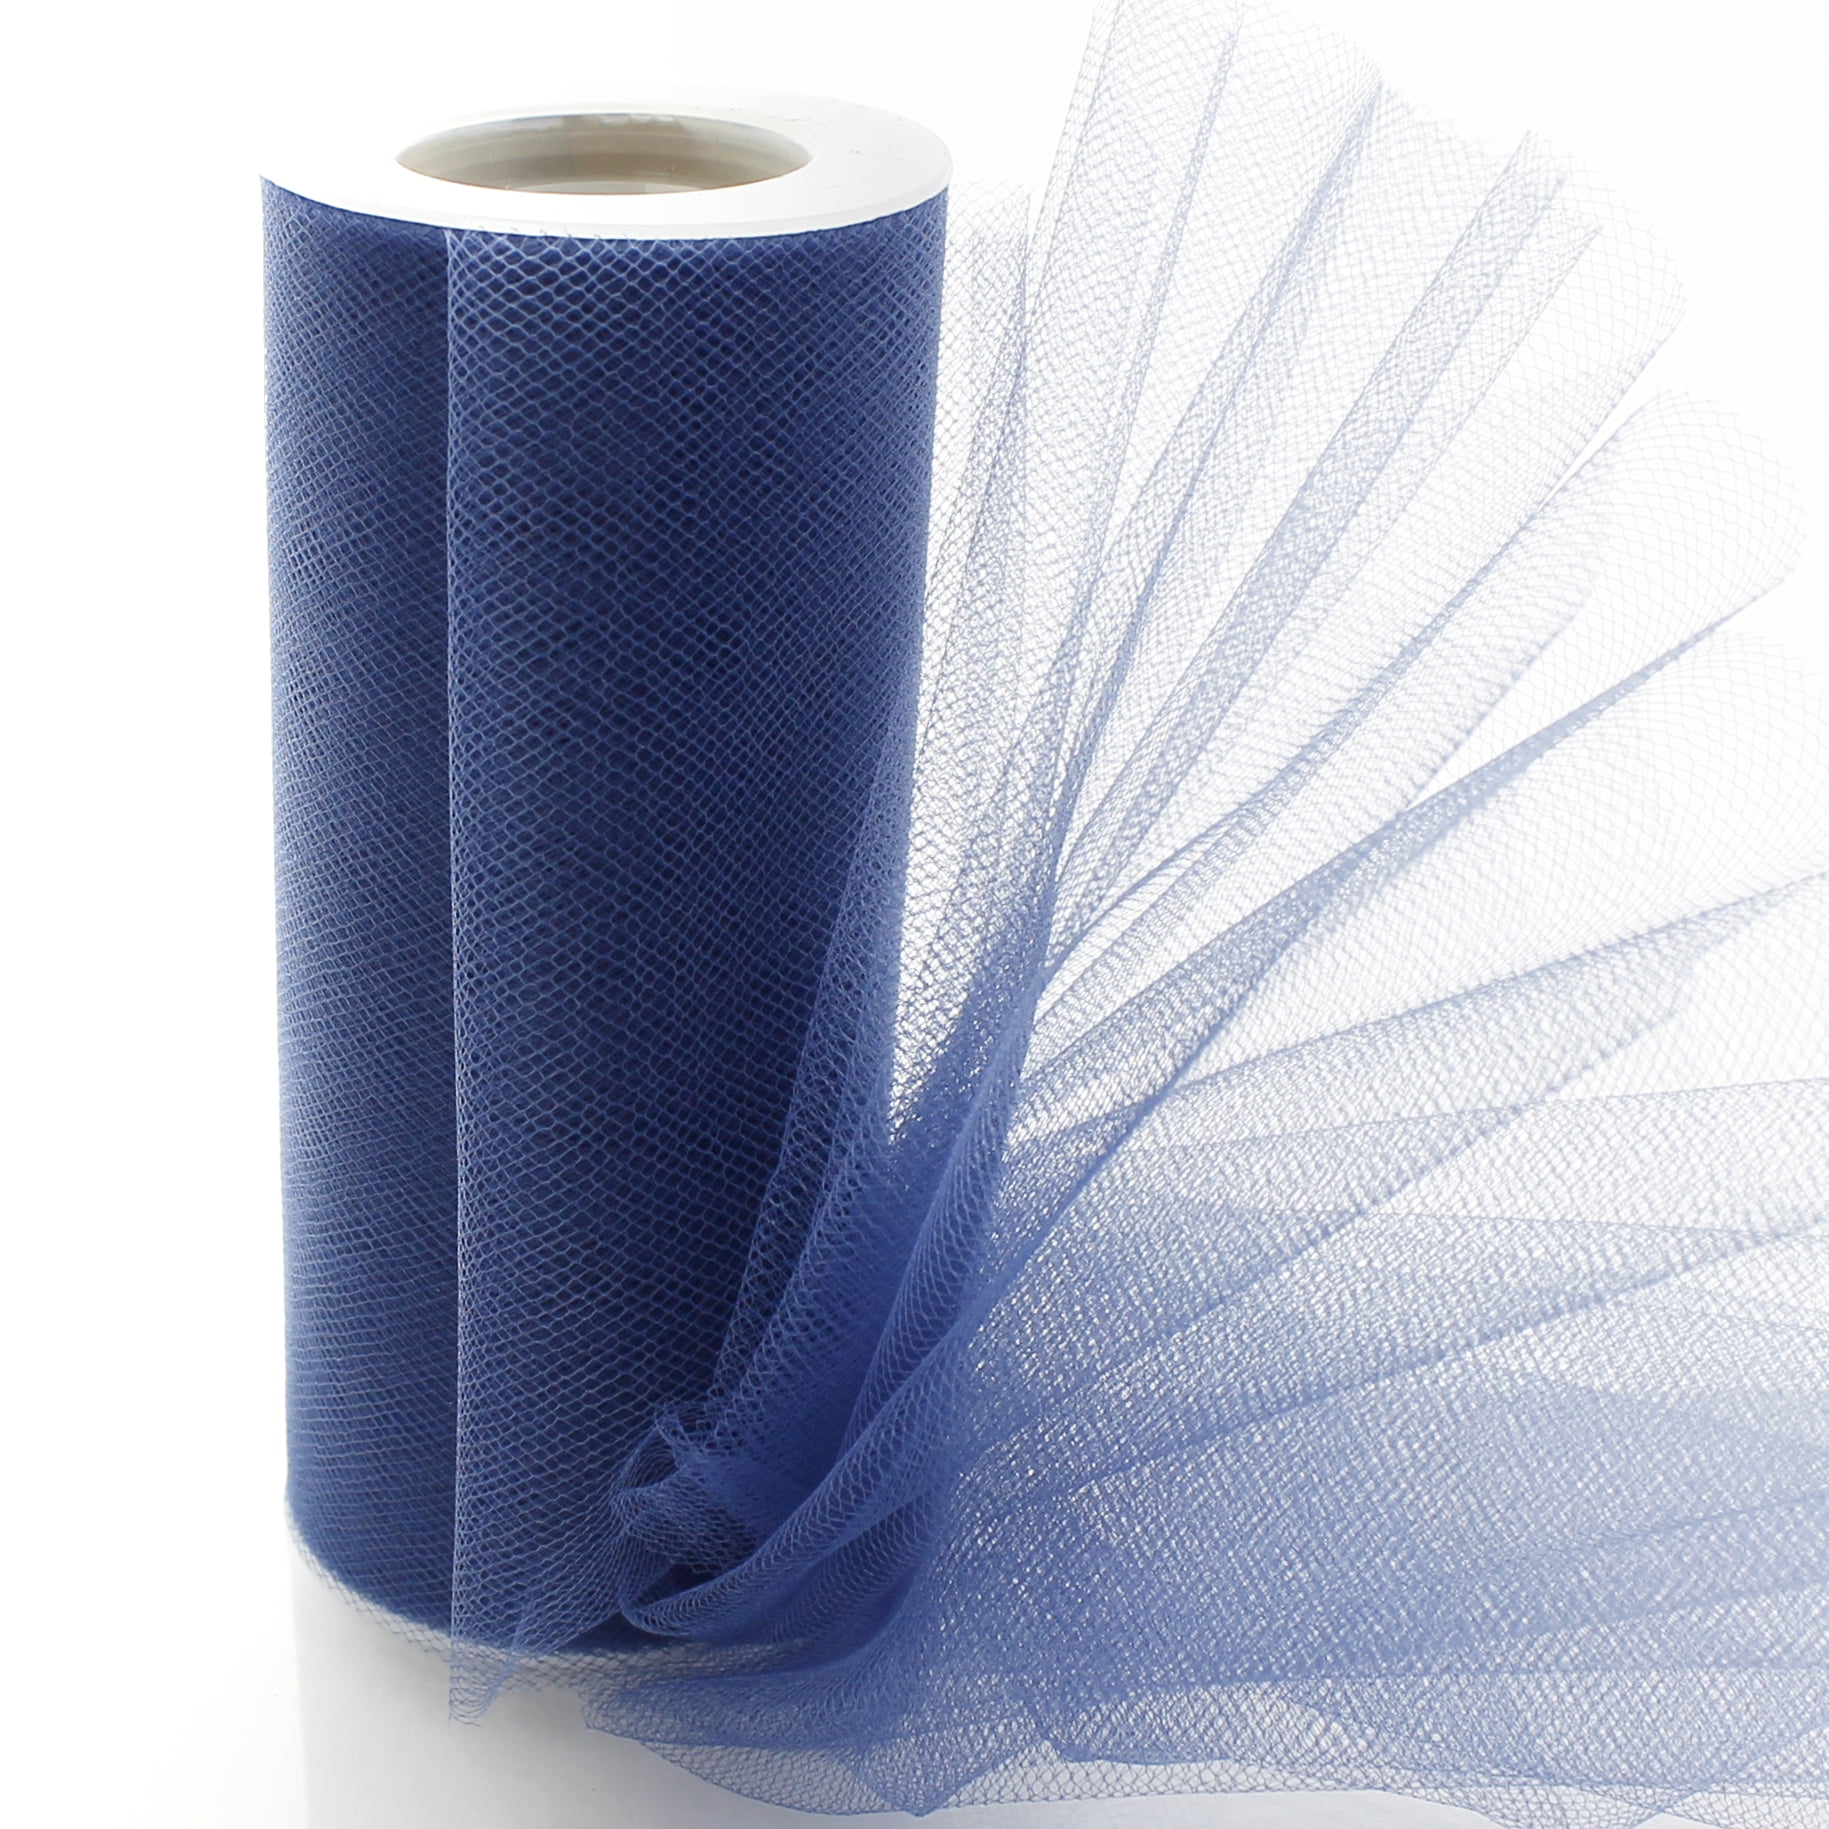 LIGHT BLUE TULLE 100 Yards of 6” Wide Top Quality Tutu Wedding Fabric Netting 